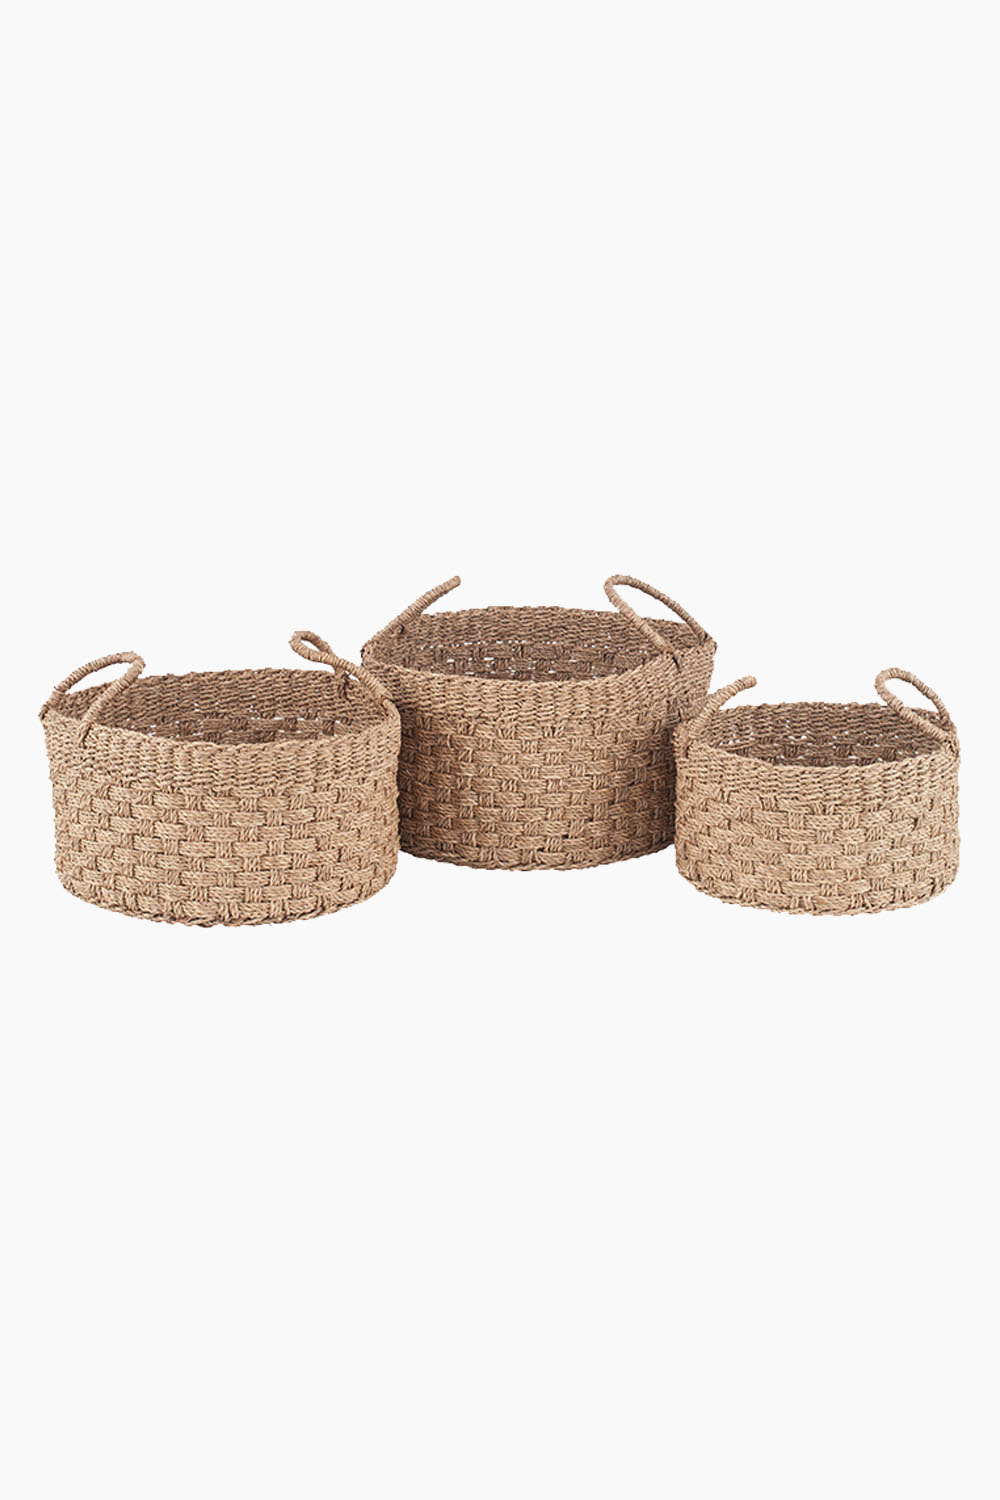 Natural Seagrass Round Baskets Set of 3